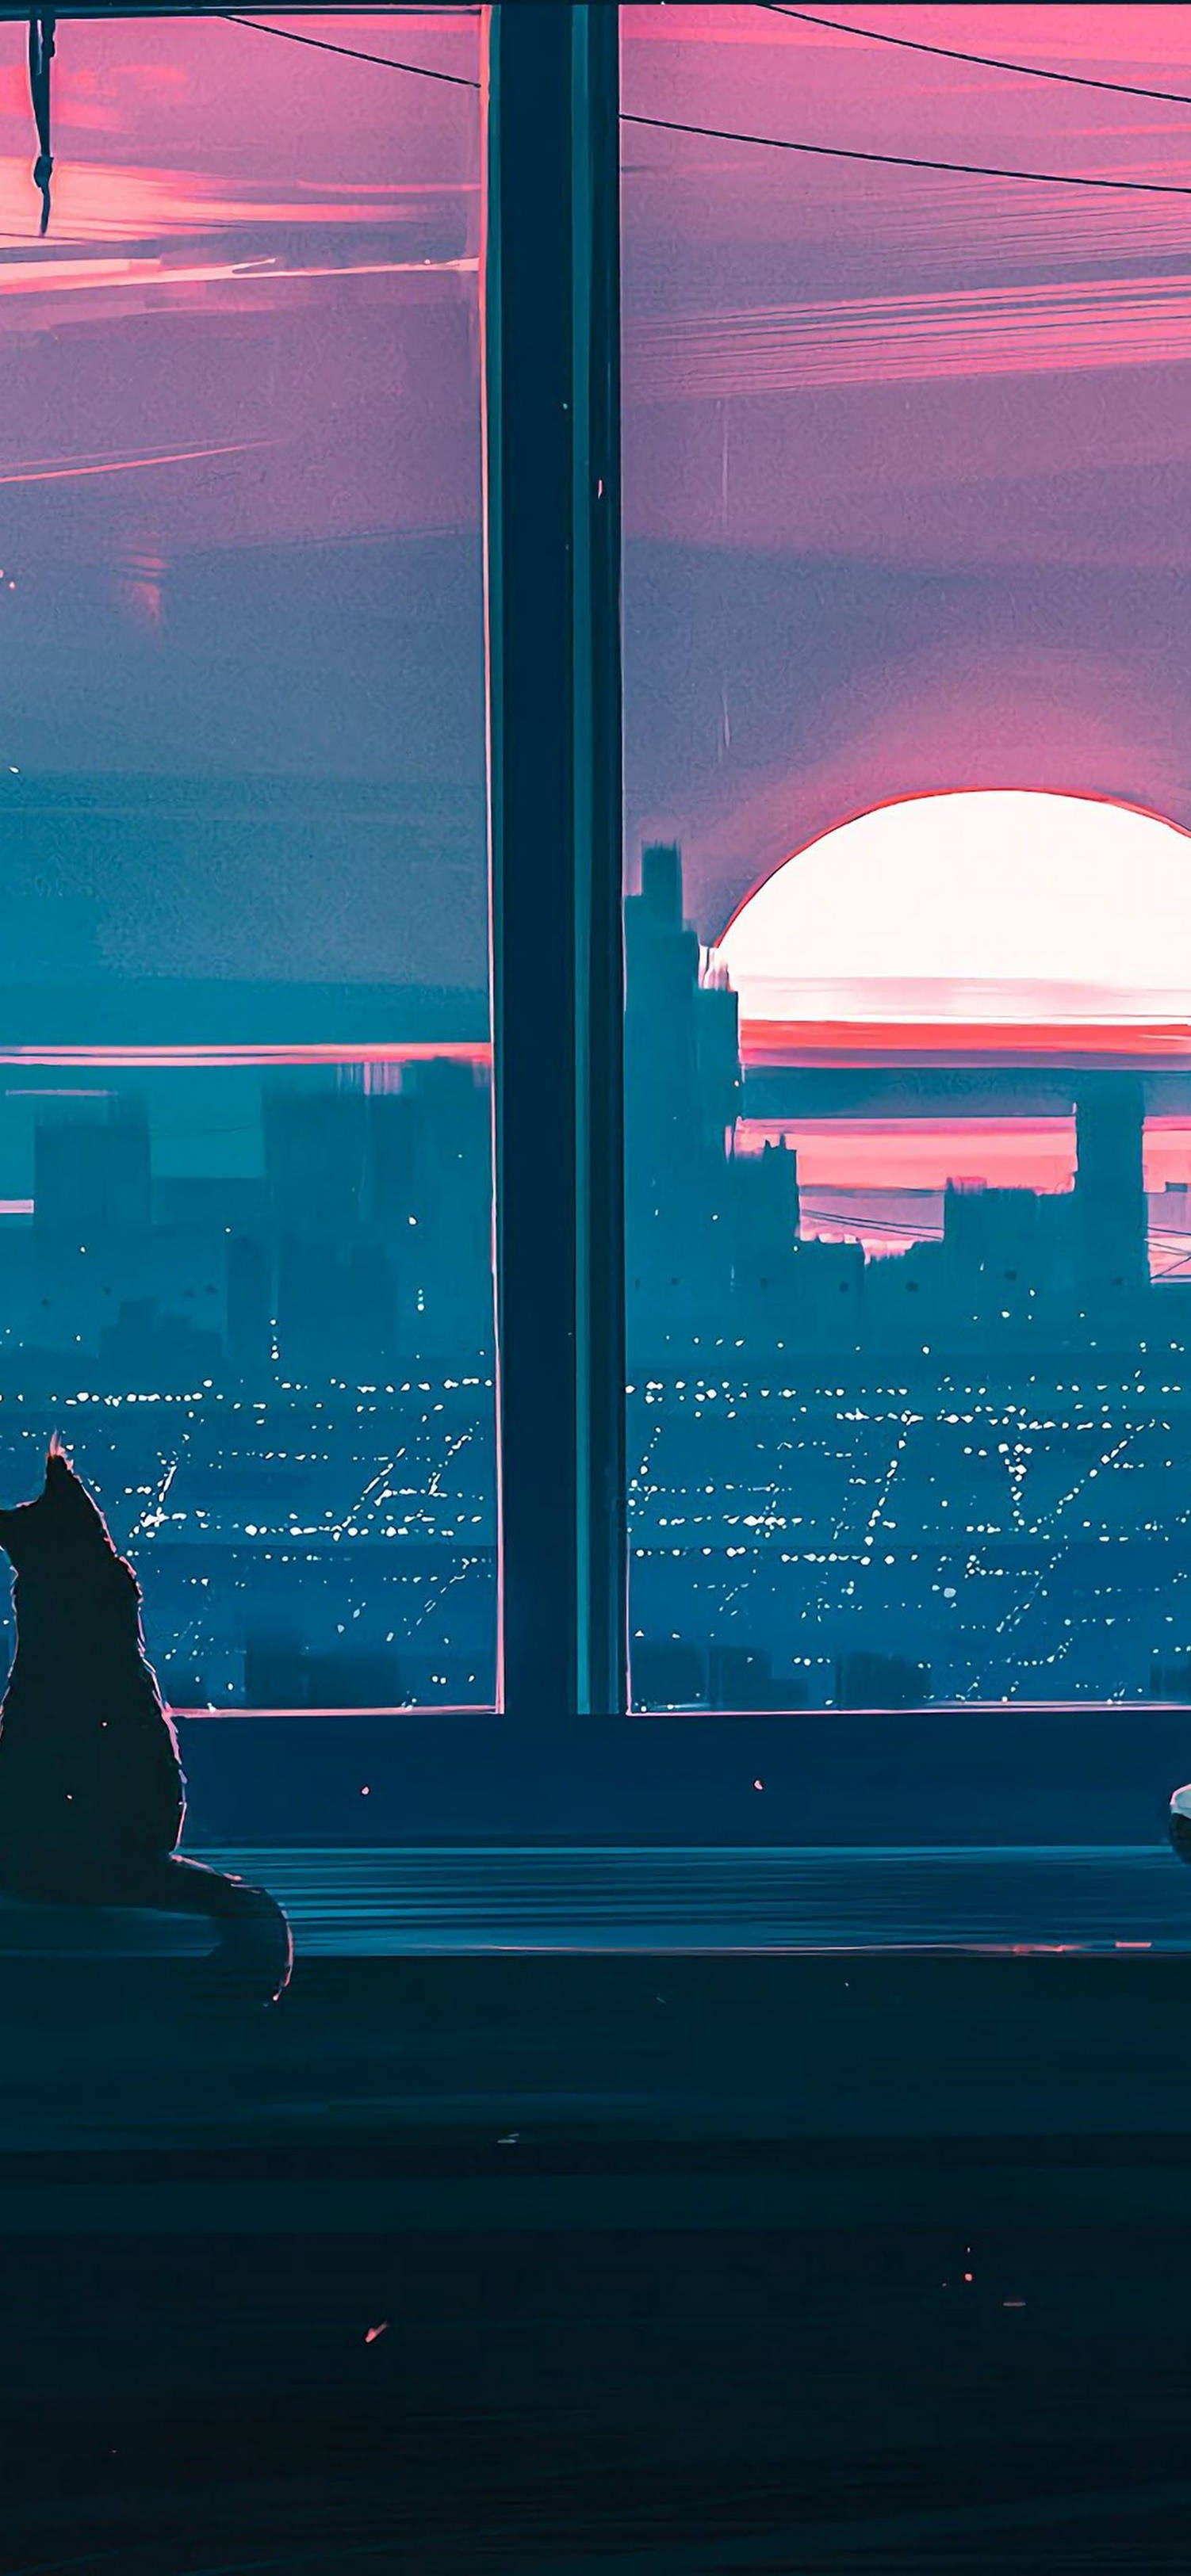 Entrancing Sunset Anime Aesthetics For Iphone - A Cat By The Window